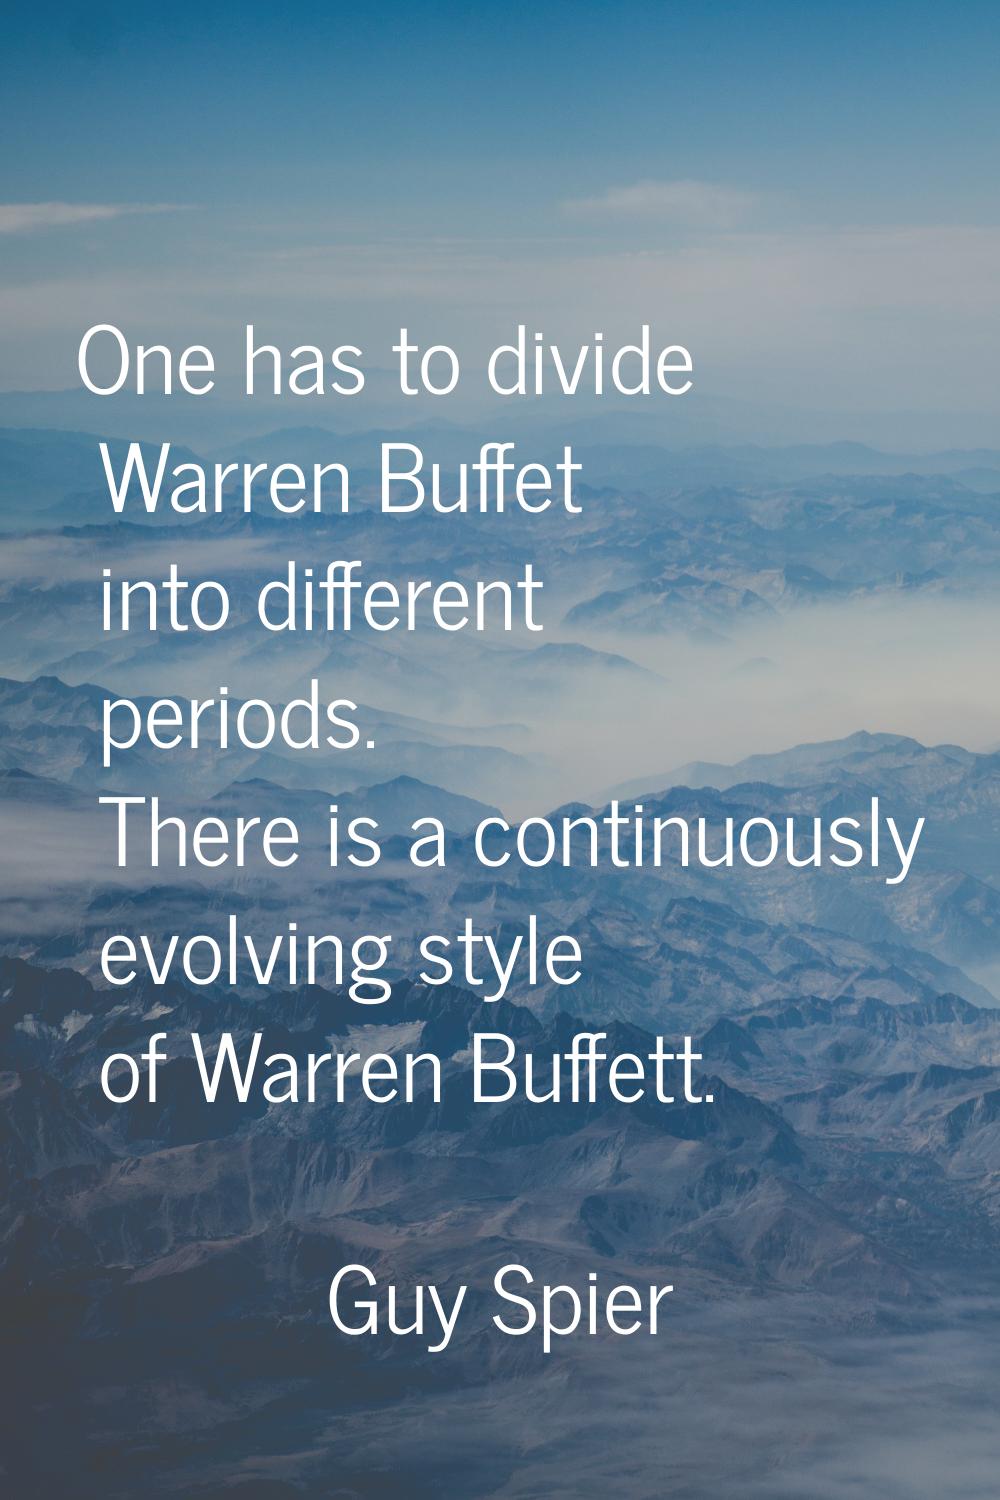 One has to divide Warren Buffet into different periods. There is a continuously evolving style of W